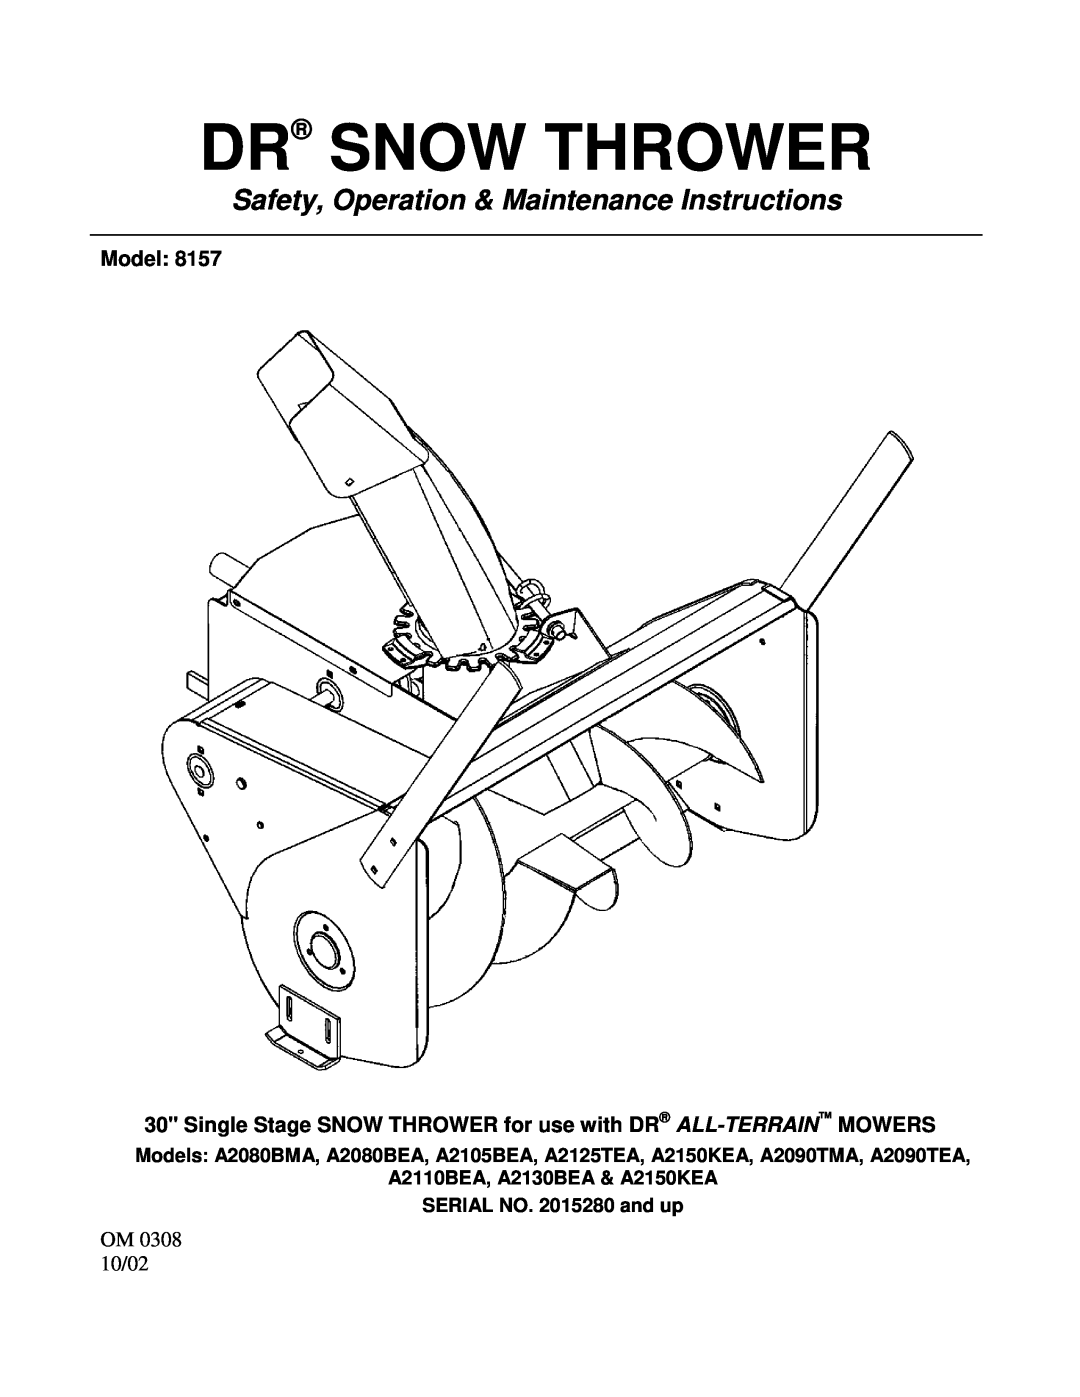 Country Home Products A2090TEA, A2080BEA, A2105BEA manual Dr Snow Thrower, Safety, Operation & Maintenance Instructions 